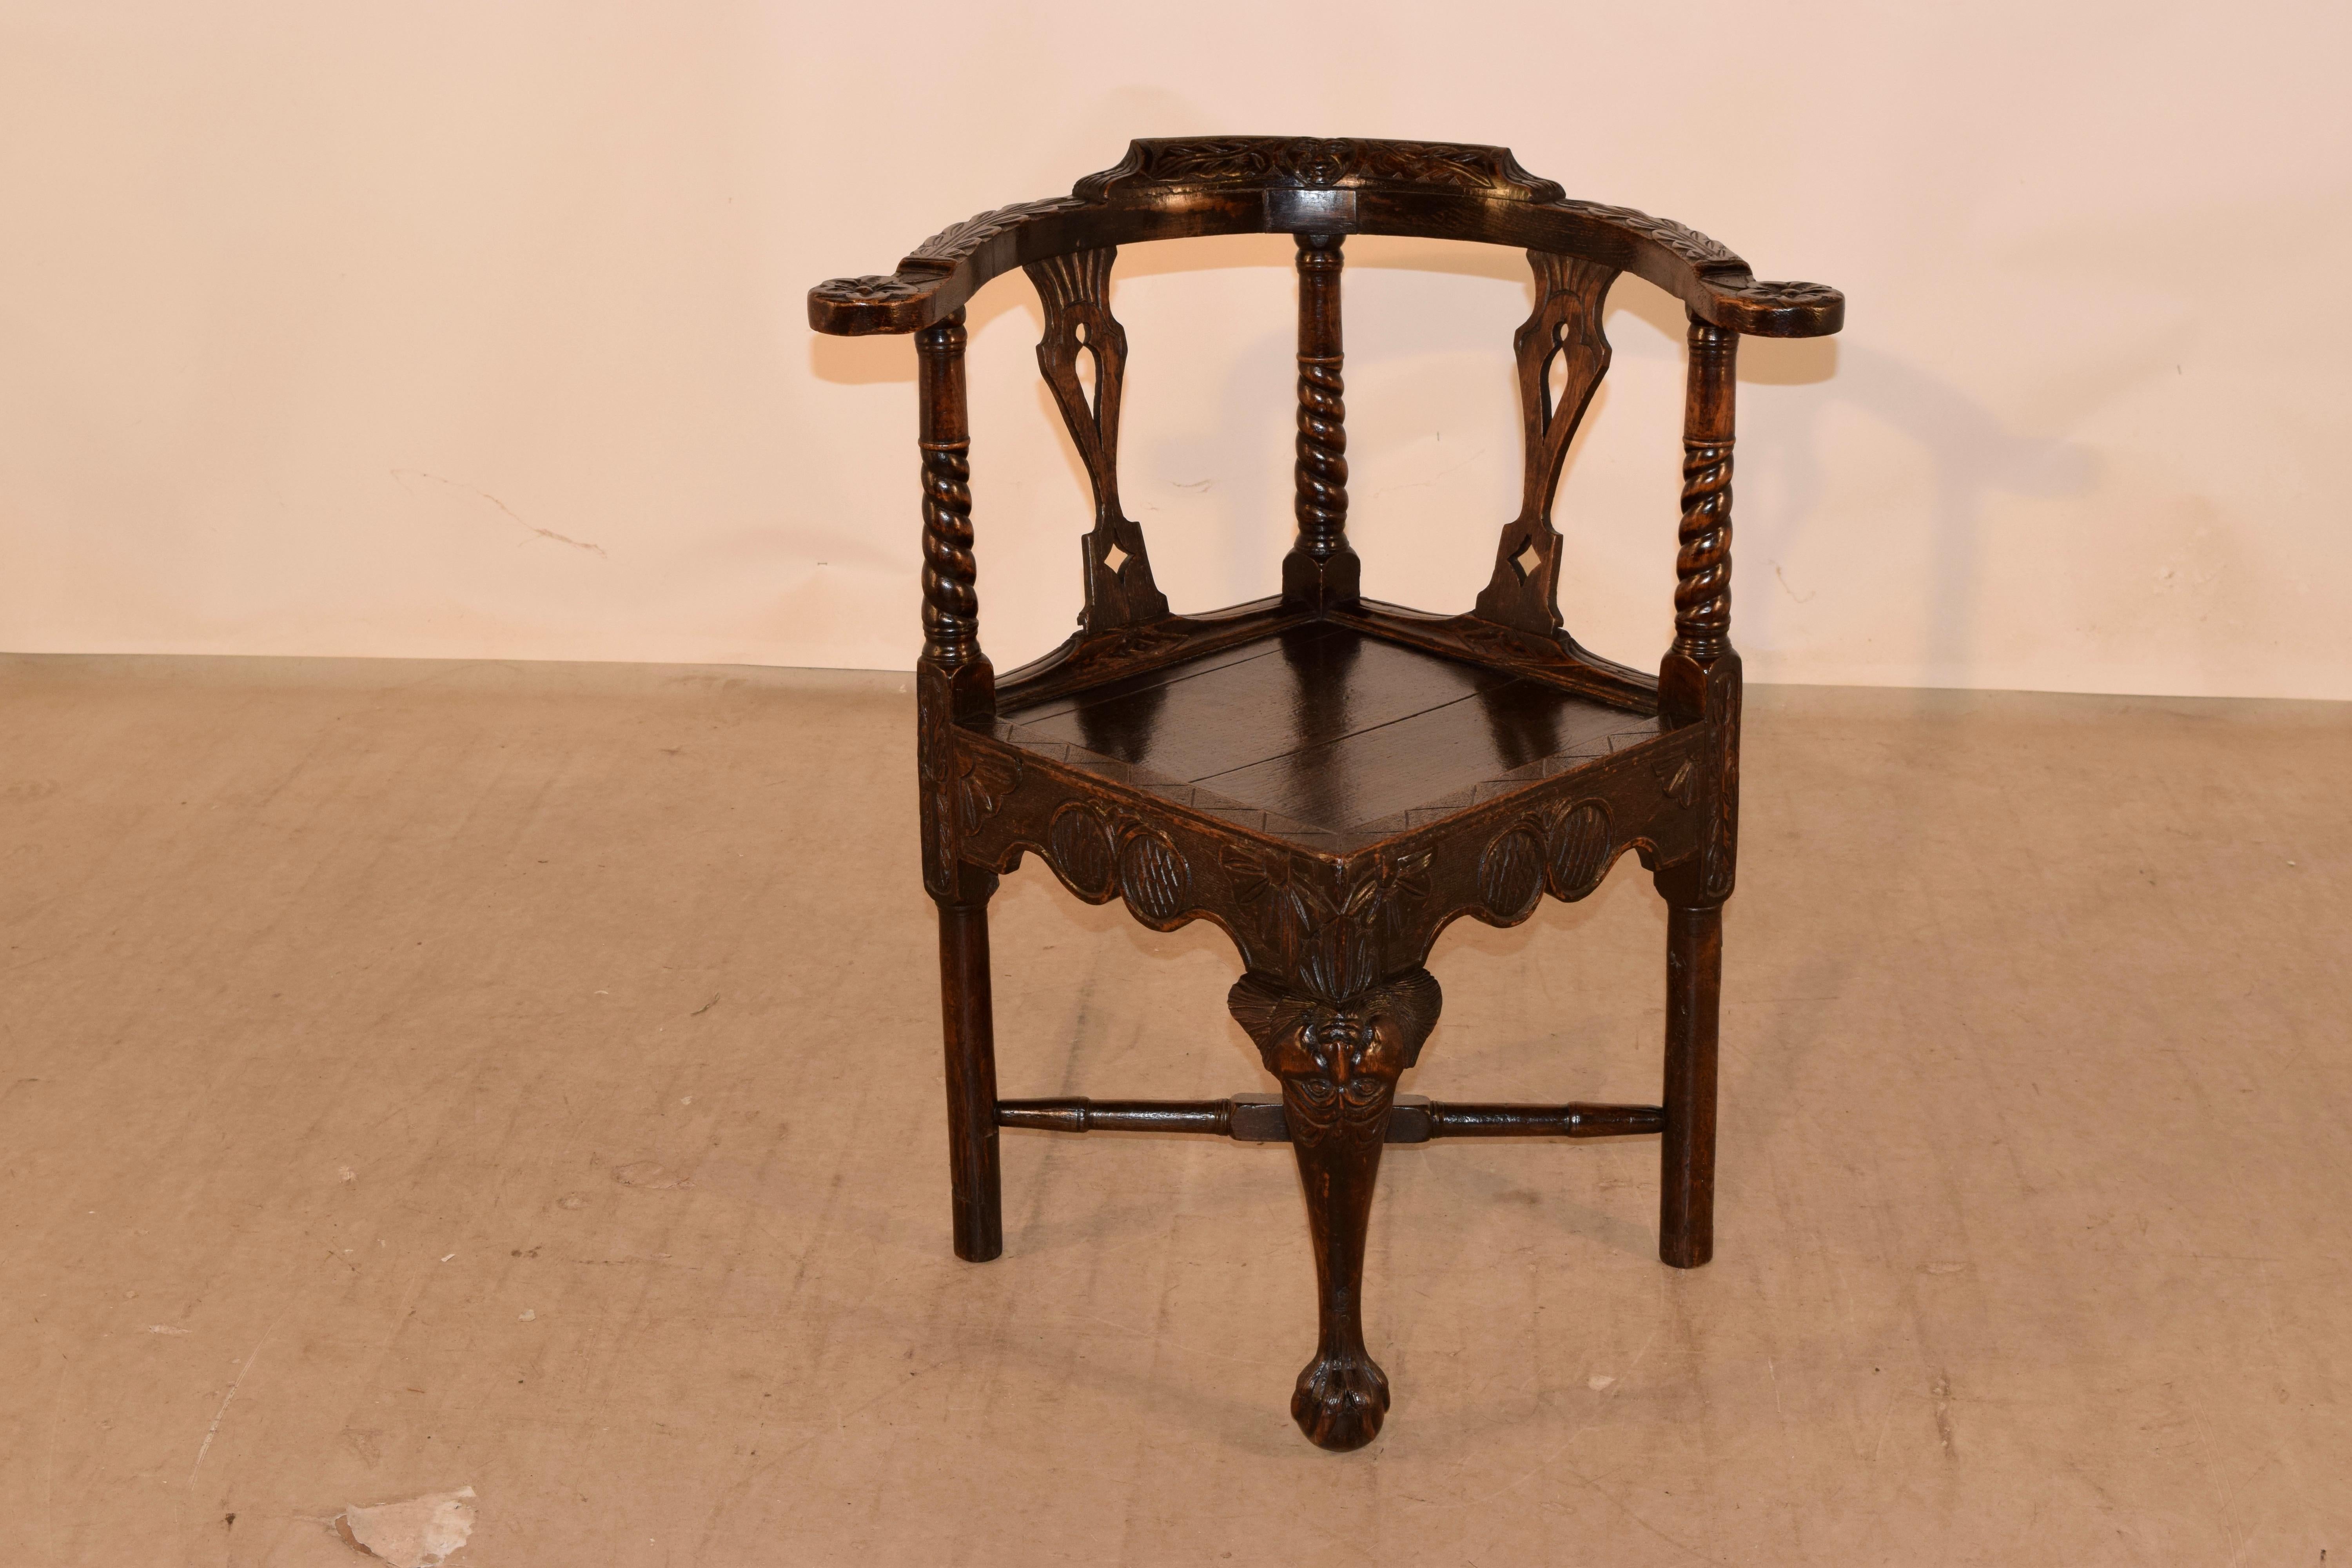 18th century carved oak corner chair from Scotland with a wonderfully carved back, supports and arms, all depicting whimsical faces and leaves. The arm supports are hand turned with twists and are flanked by hand carved open vase back splats. The